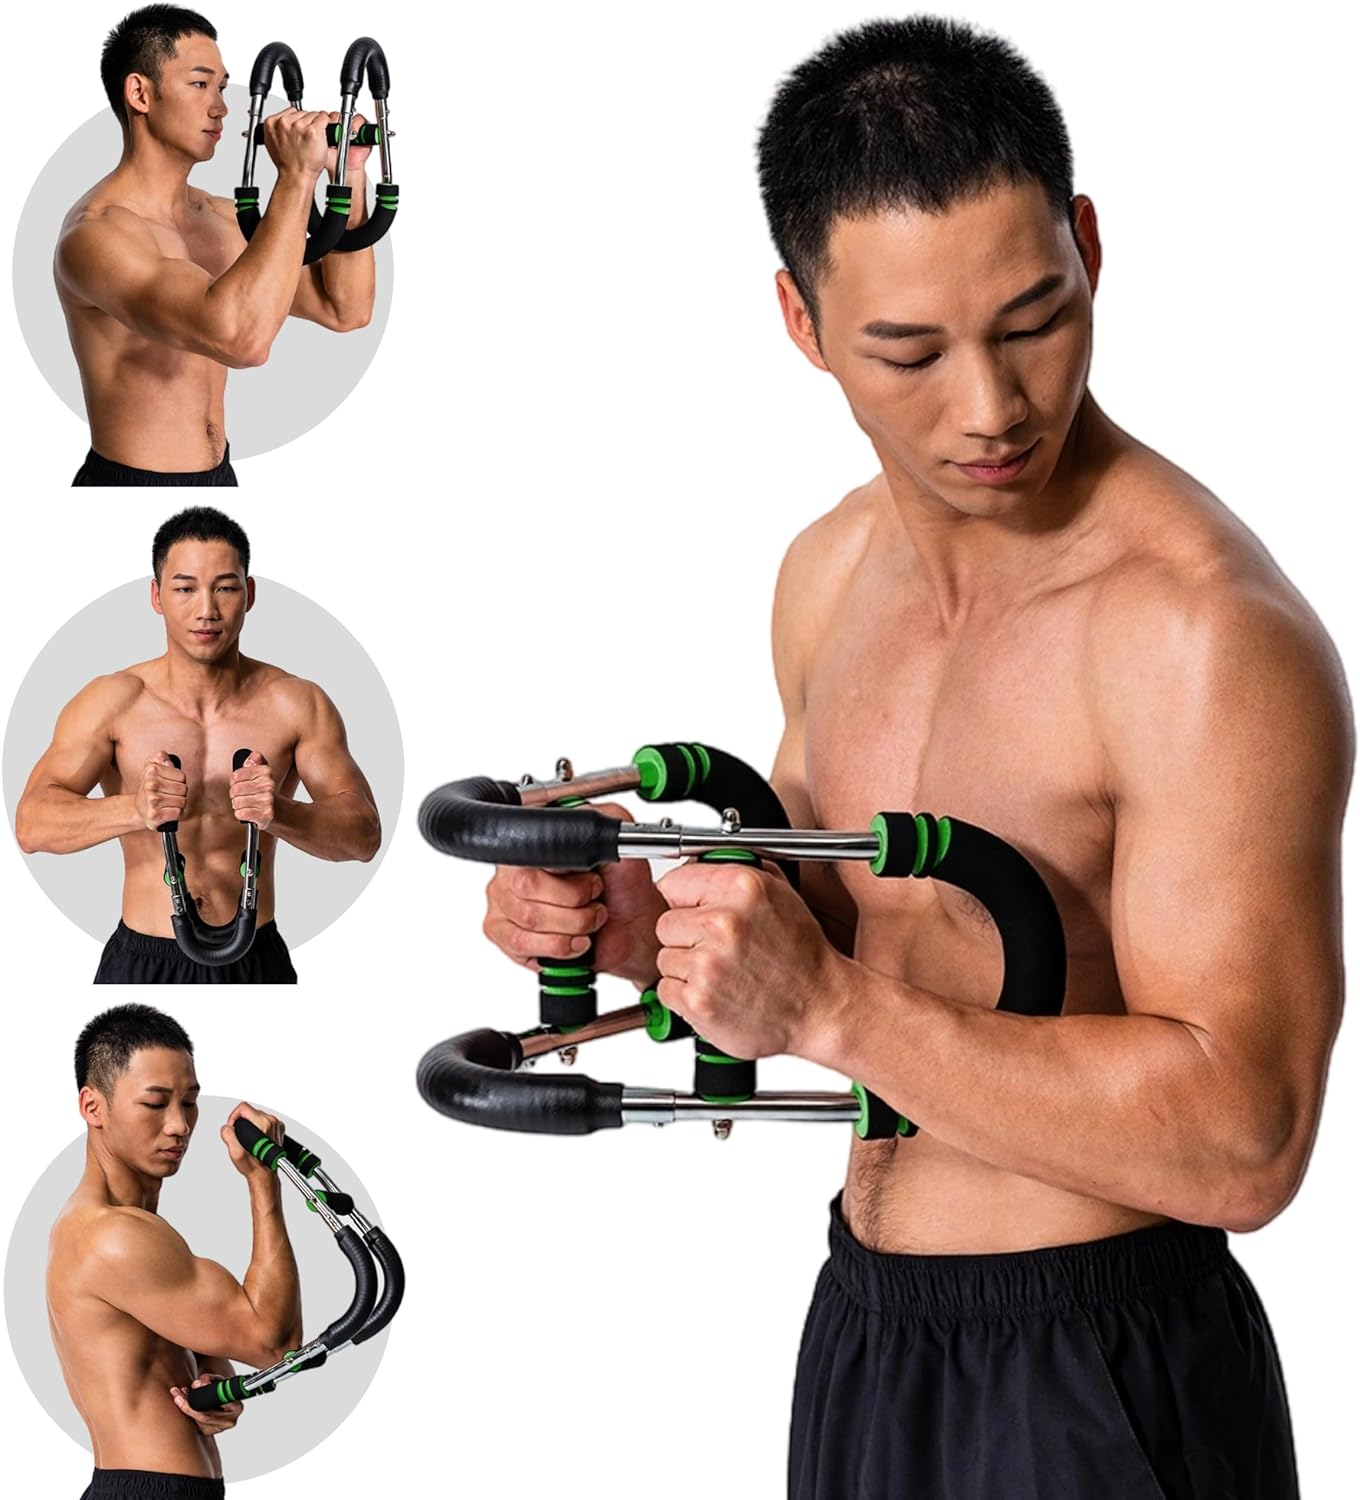 JevenFening U-Shape Power Twister Arm Exerciser. Adjustable Chest Expander.(65-100lb). Biceps,Triceps,Shoulders,Back,Forearm and Inner Thigh Workout Equipment.Upper Body Strength Training Machine